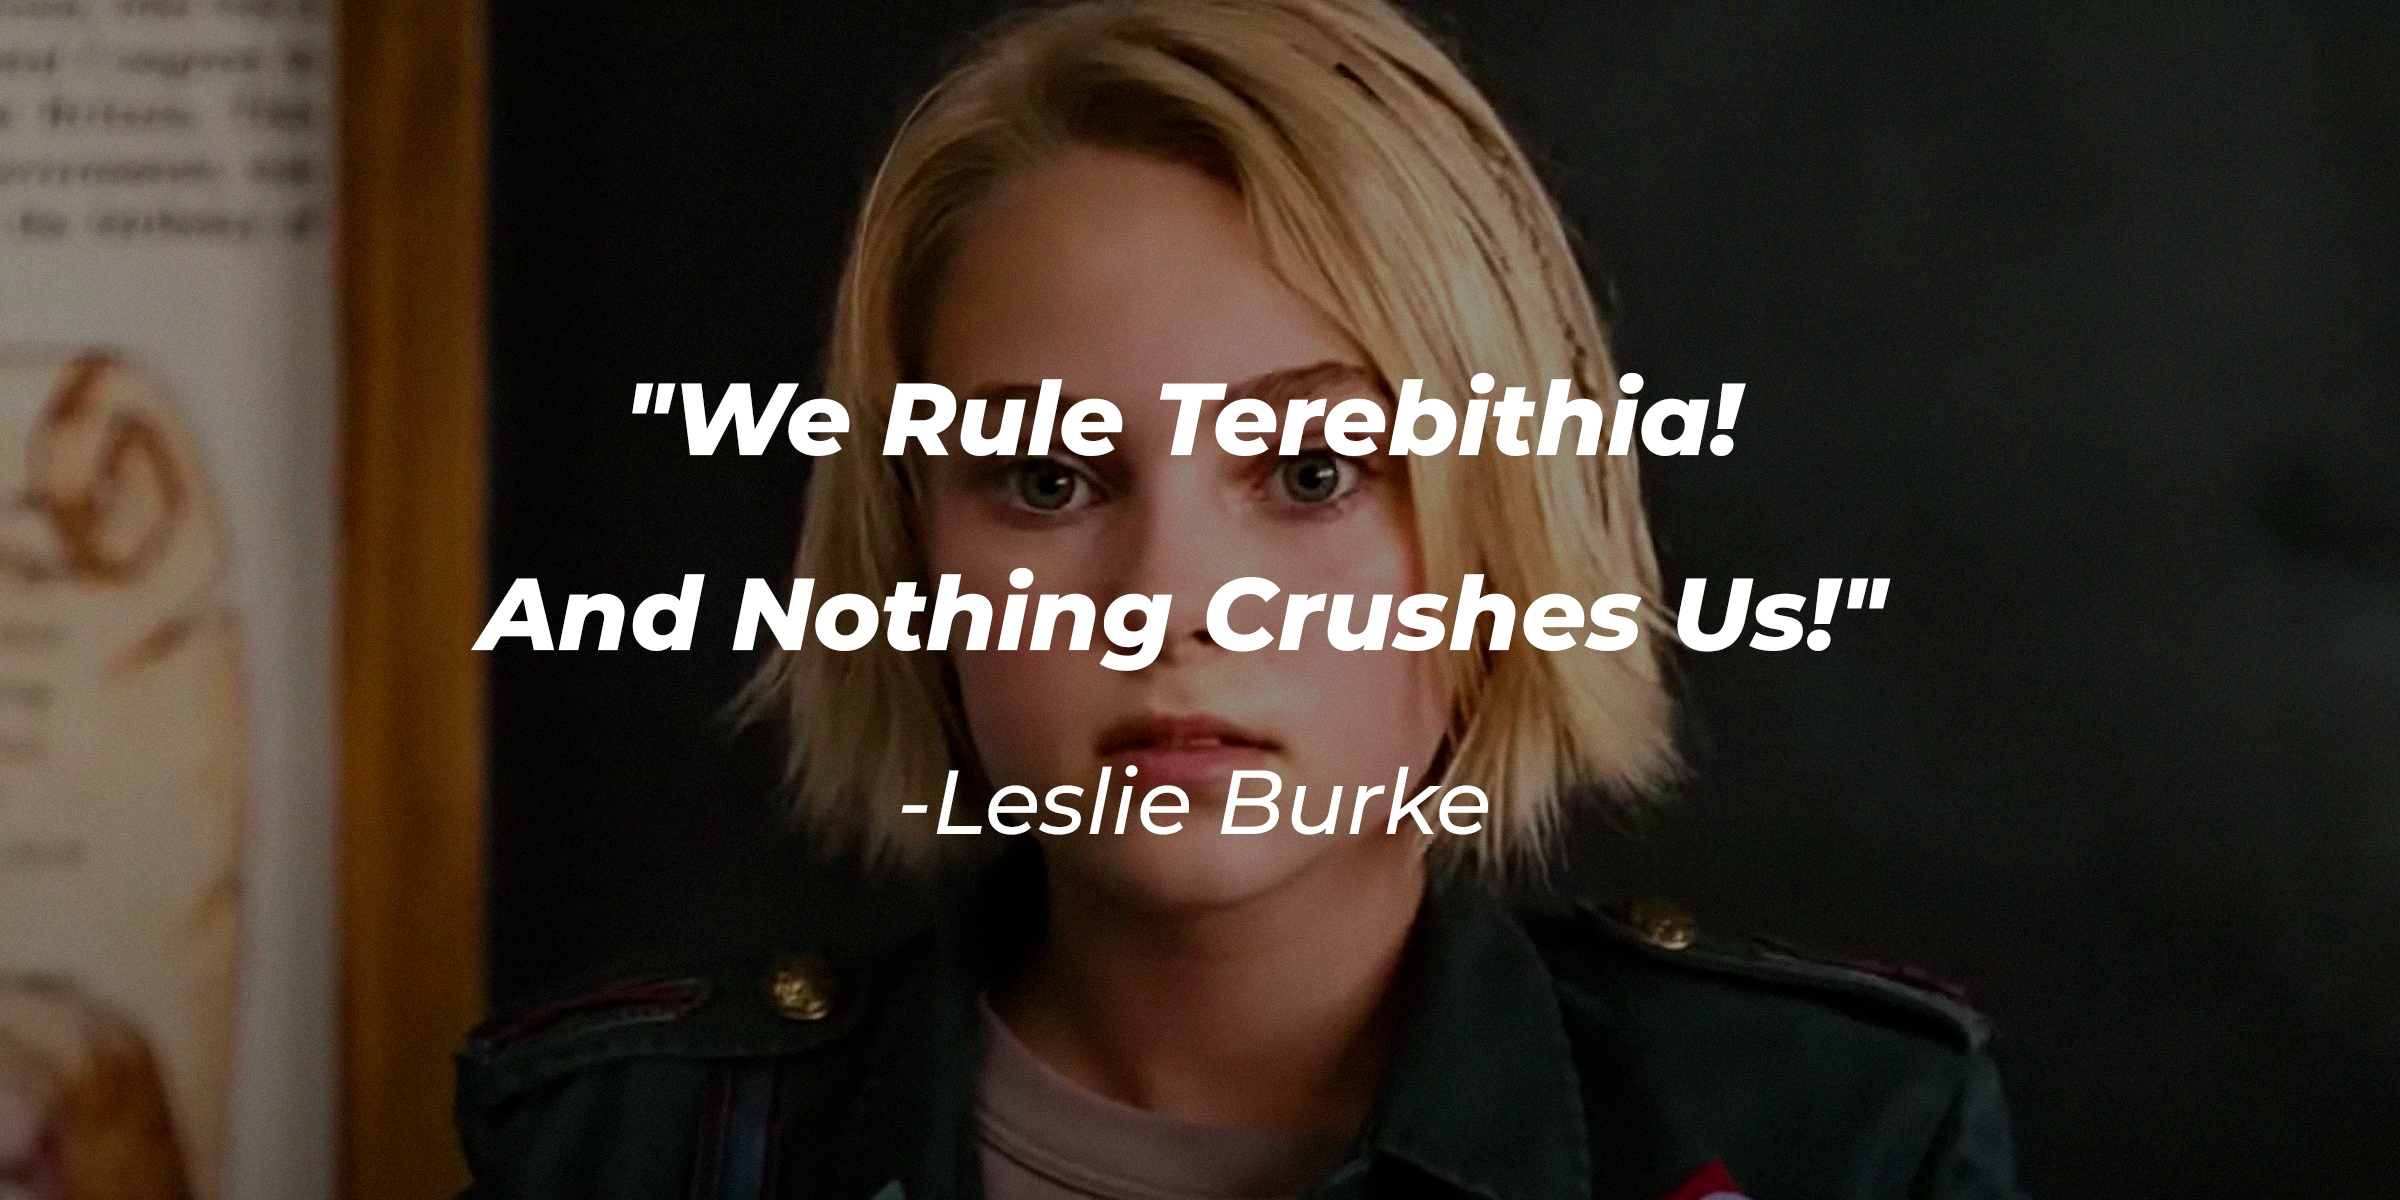 Leslie Burke with her quote: "We Rule Terabithia! And Nothing Crushes Us! | Source: youtube.com/DisneyMovieTrailers